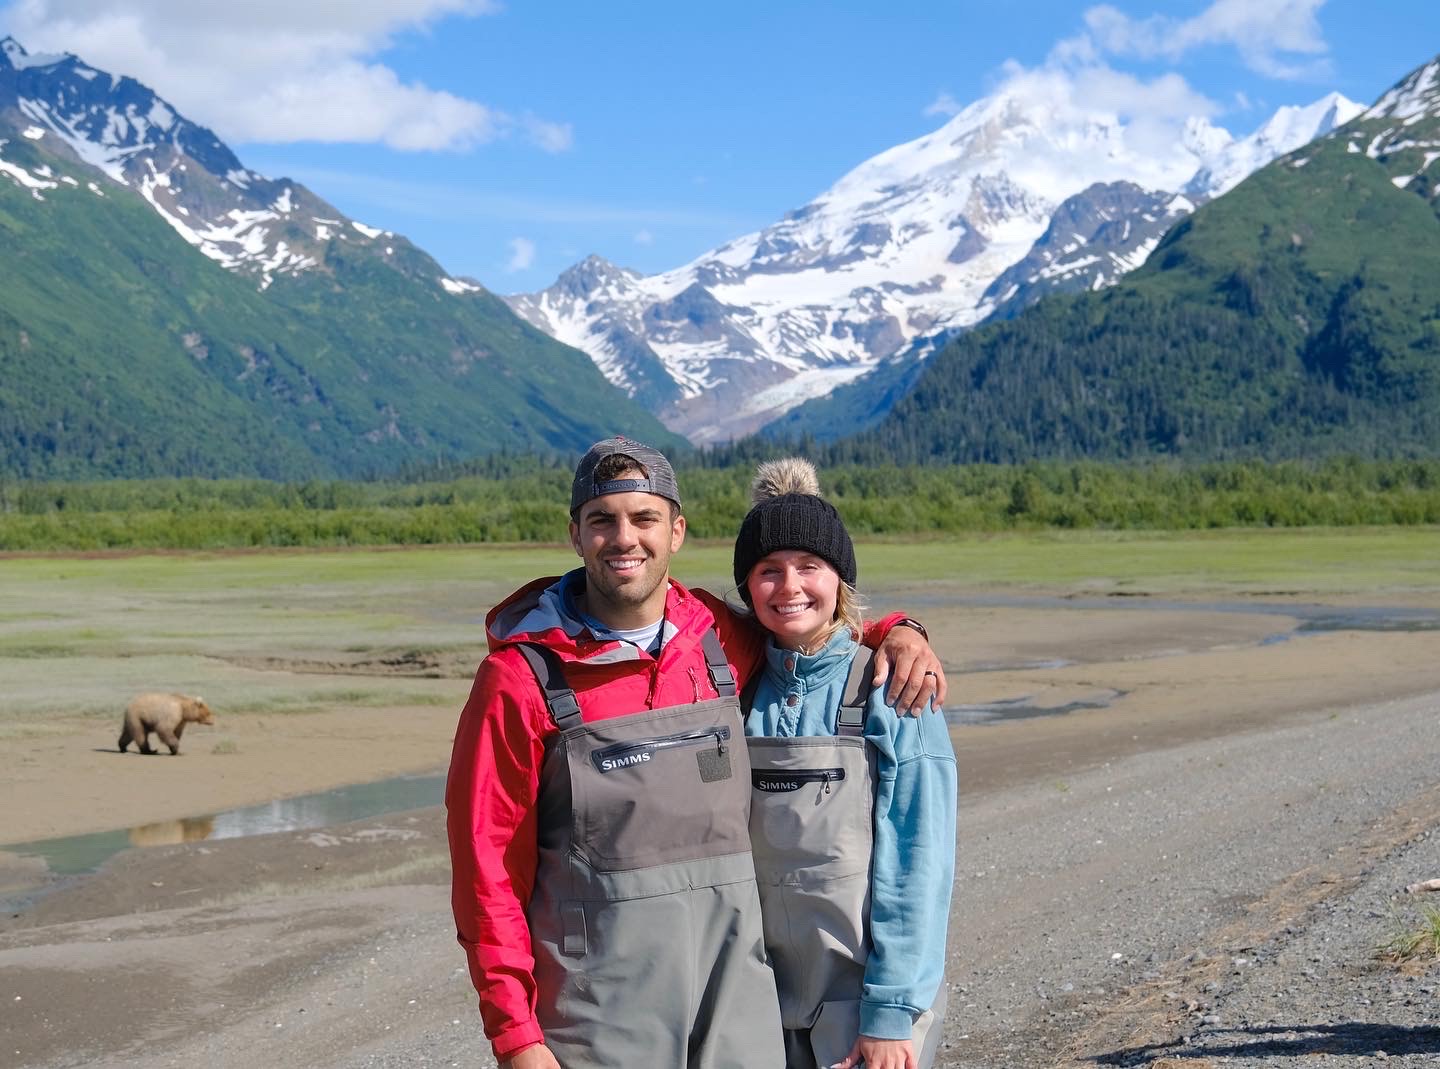 Tessa Wisniewski鈥�17, 鈥�19 and her husband standing on a shoreline with a bear and mountains behind them